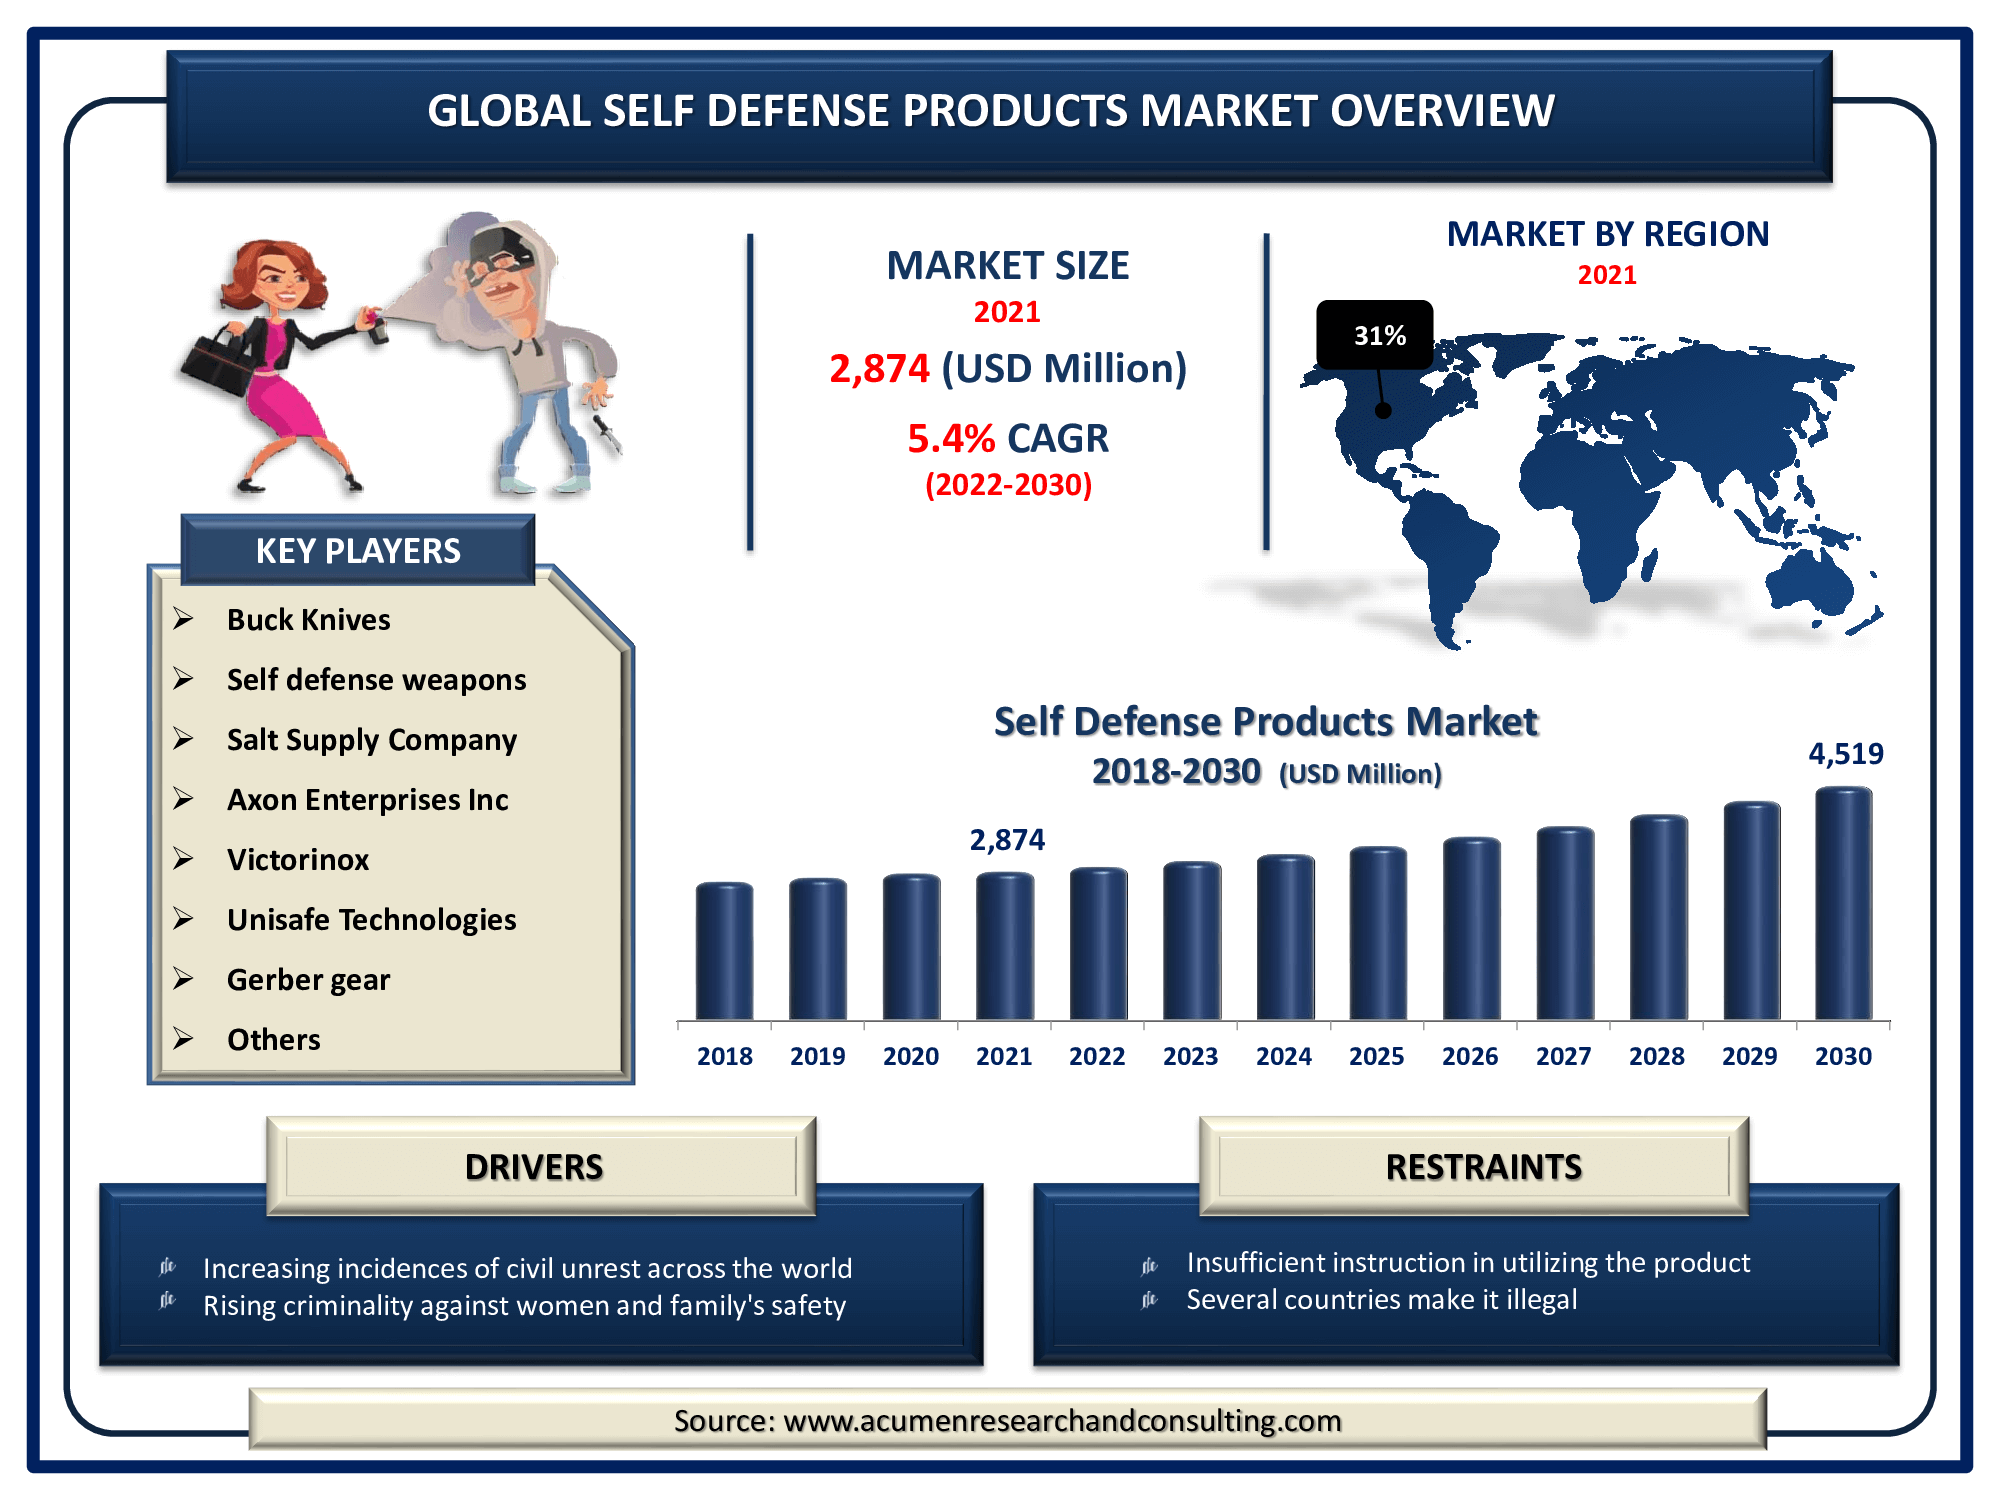 The Global Self Defense Products Market Size was valued at USD 2,874 Million in 2021 and is predicted to be worth USD 4,519 Million by 2030, with a CAGR of 5.4% from 2022 to 2030.